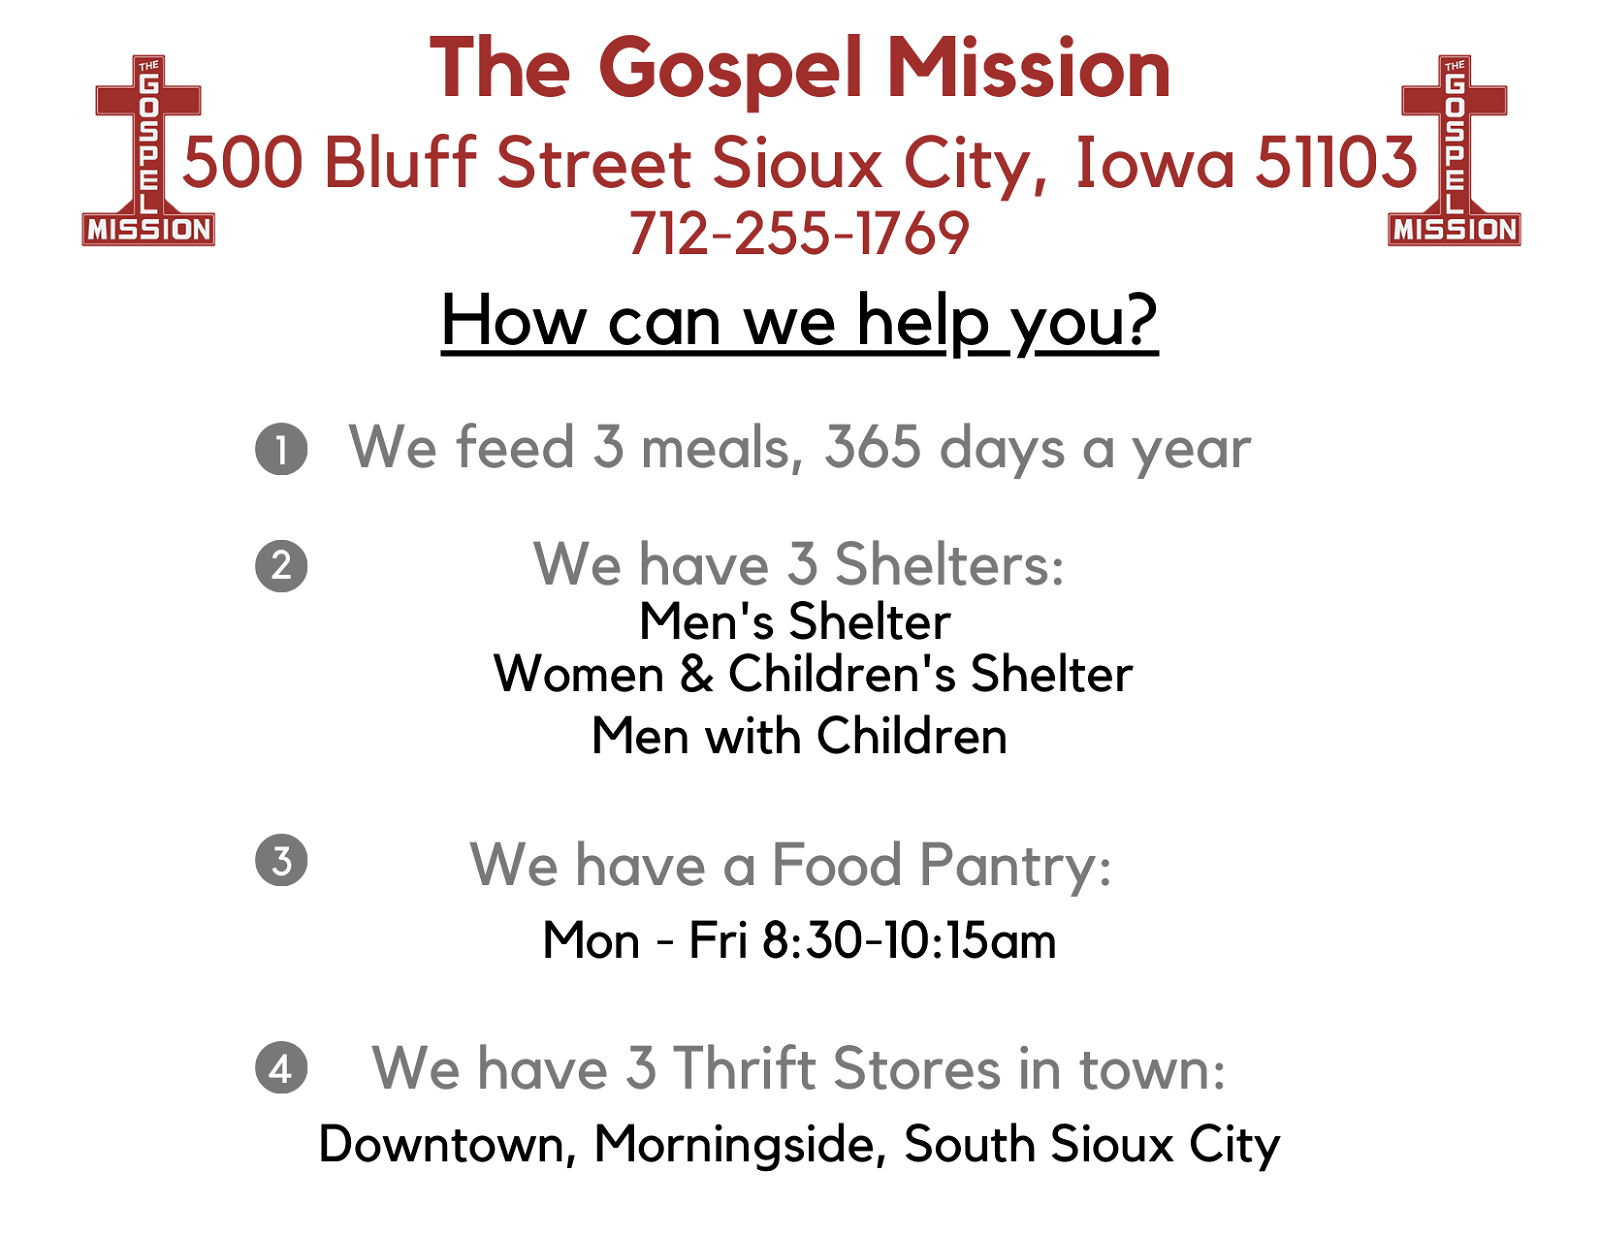 Print this off, hand it to the homeless you see on the streets. <br>Help us educate them on the services we can offer!